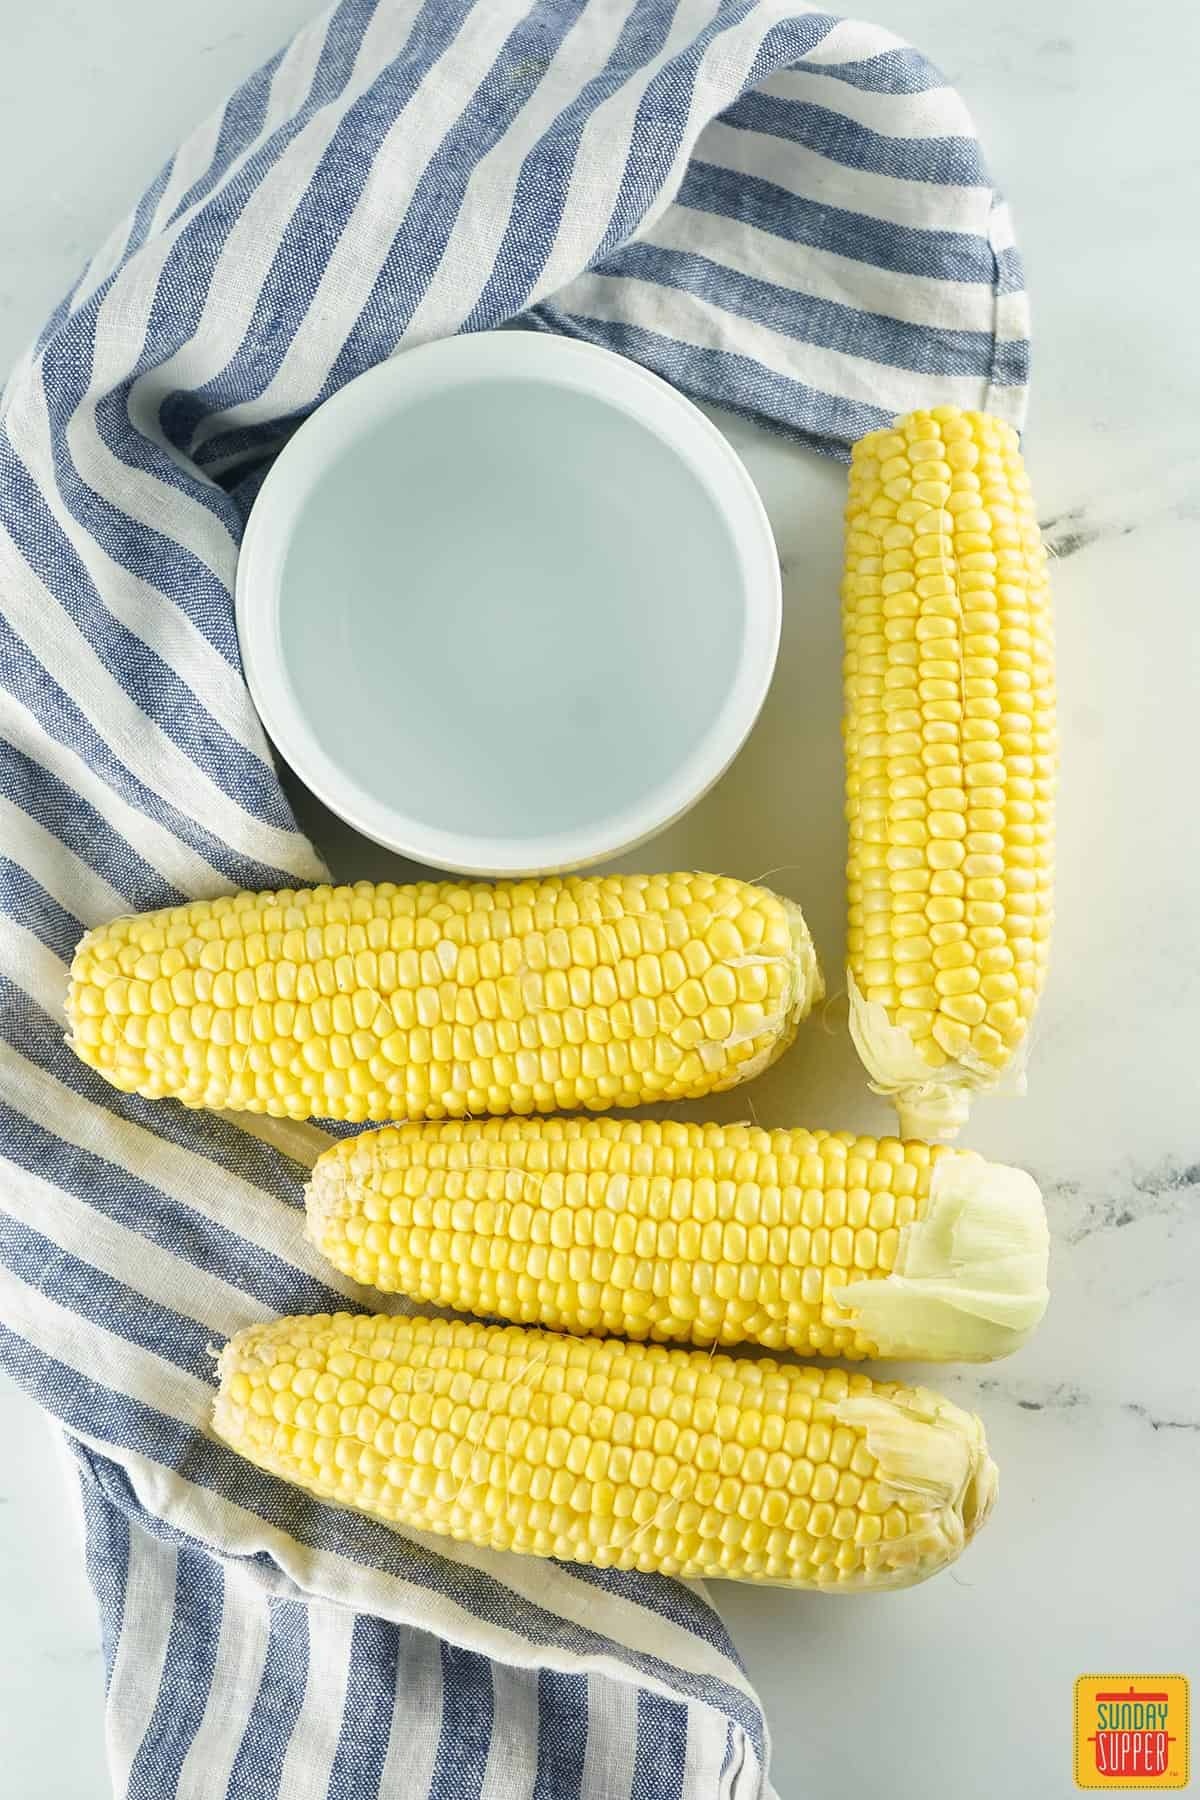 uncooked corn with a cup of water